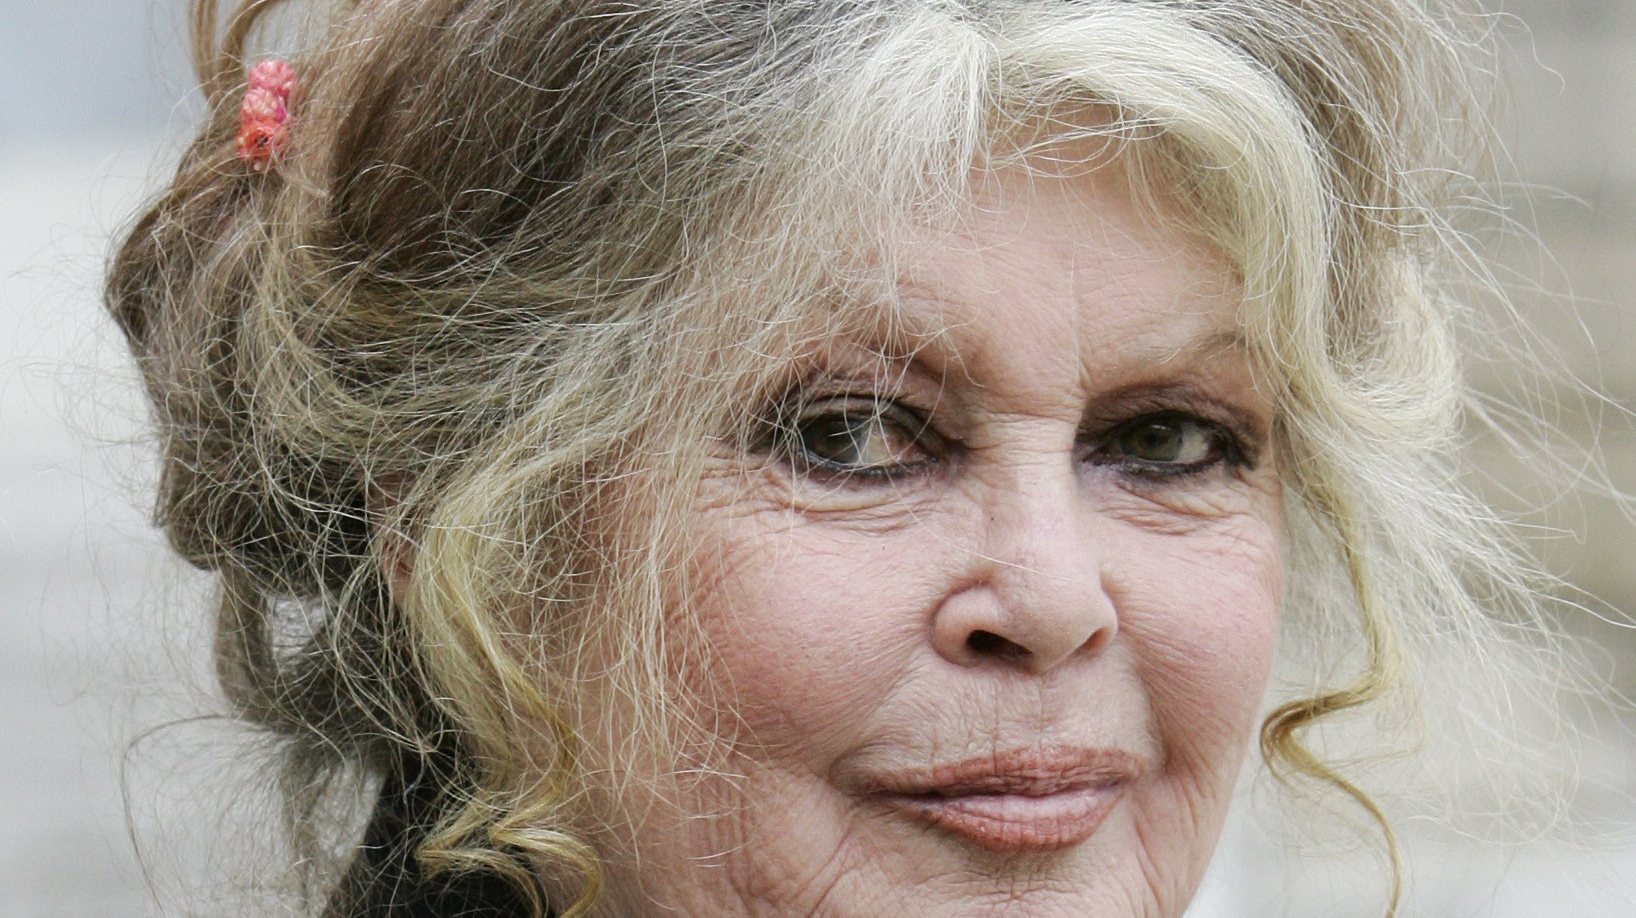 Former actress and now animals rights activist Brigitte Bardot invited for a meeting on the environment with French President Nicolas Sarkozy, at the Elysee Palace In Paris, France On September 27, 2007.